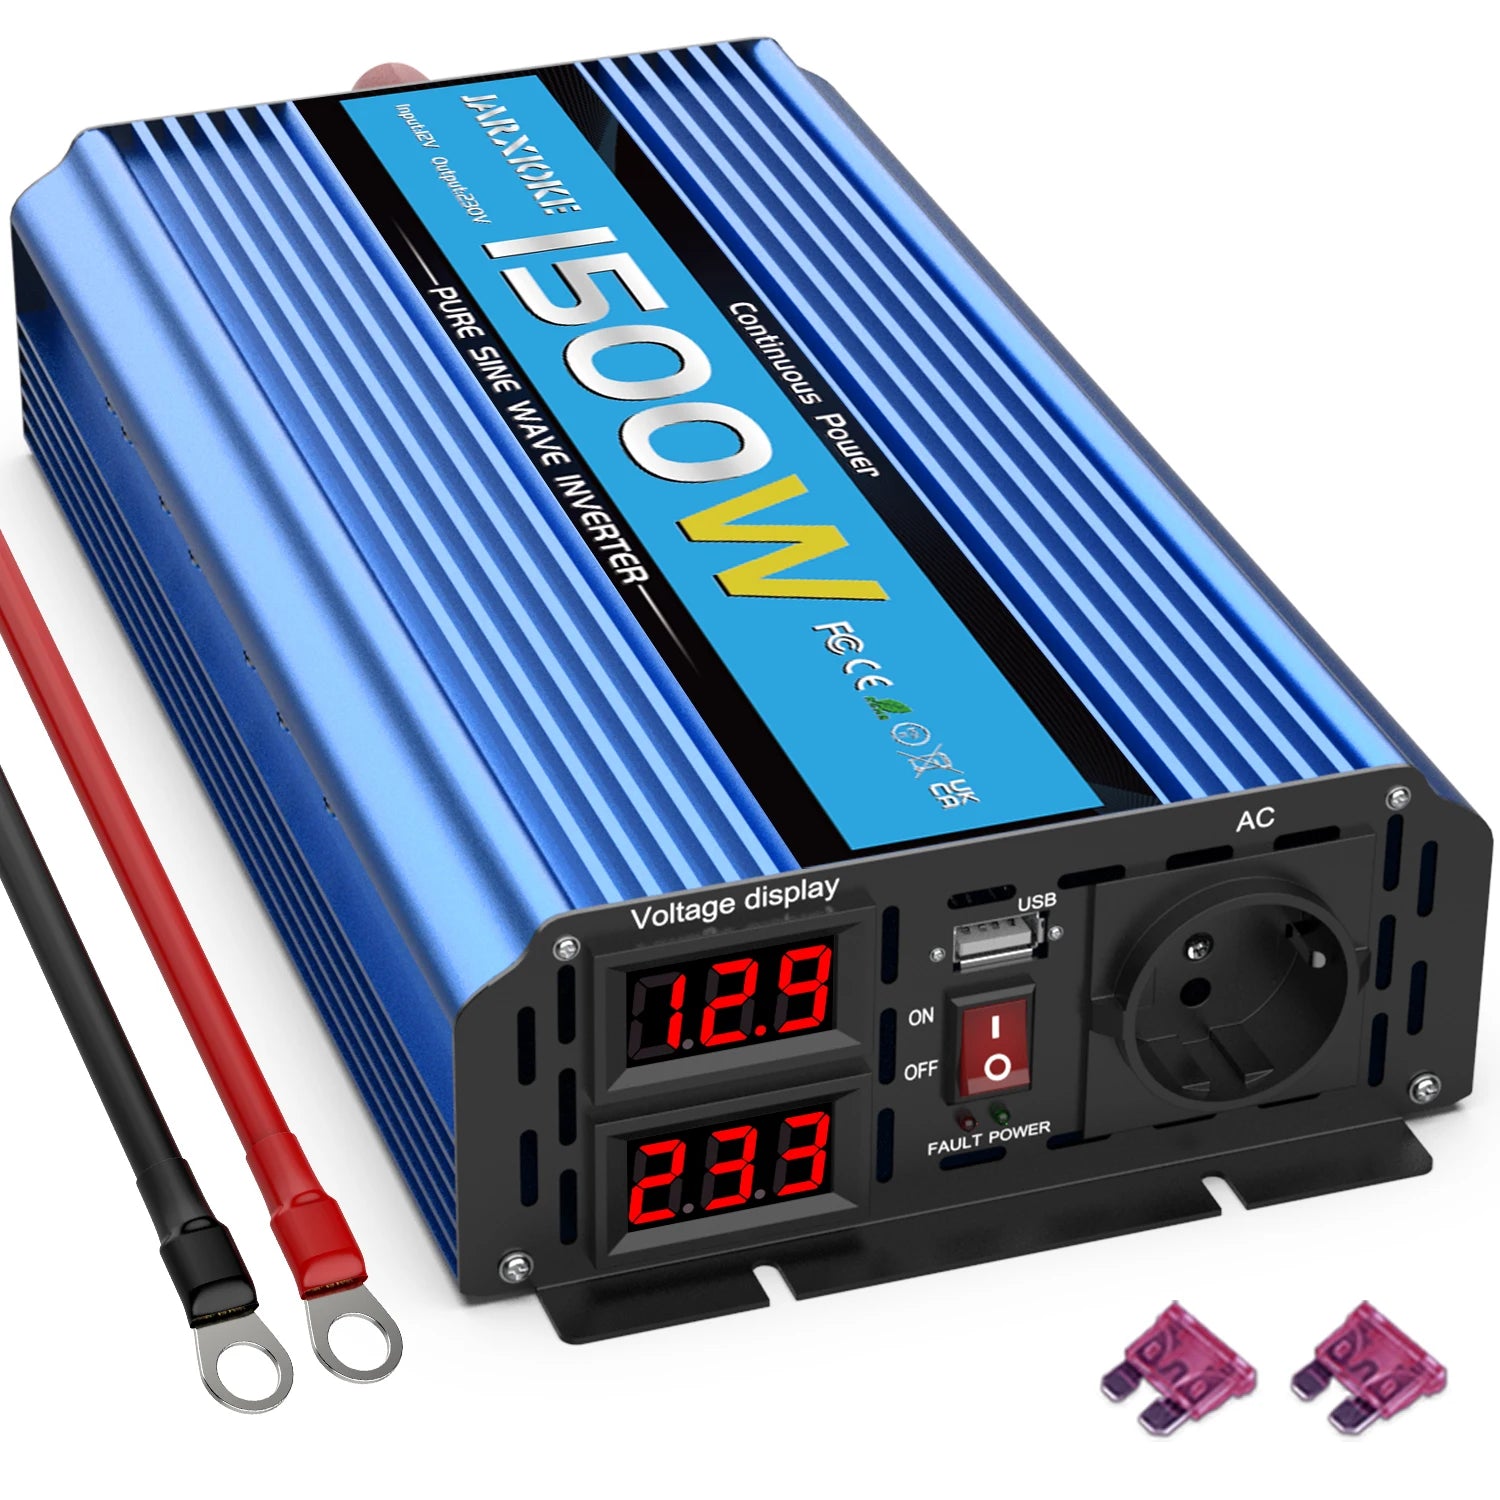 Solar inverter with pure sine wave, 12V-24V input, 220V output, and three power options: 4000W, 3000W, or 2000W.